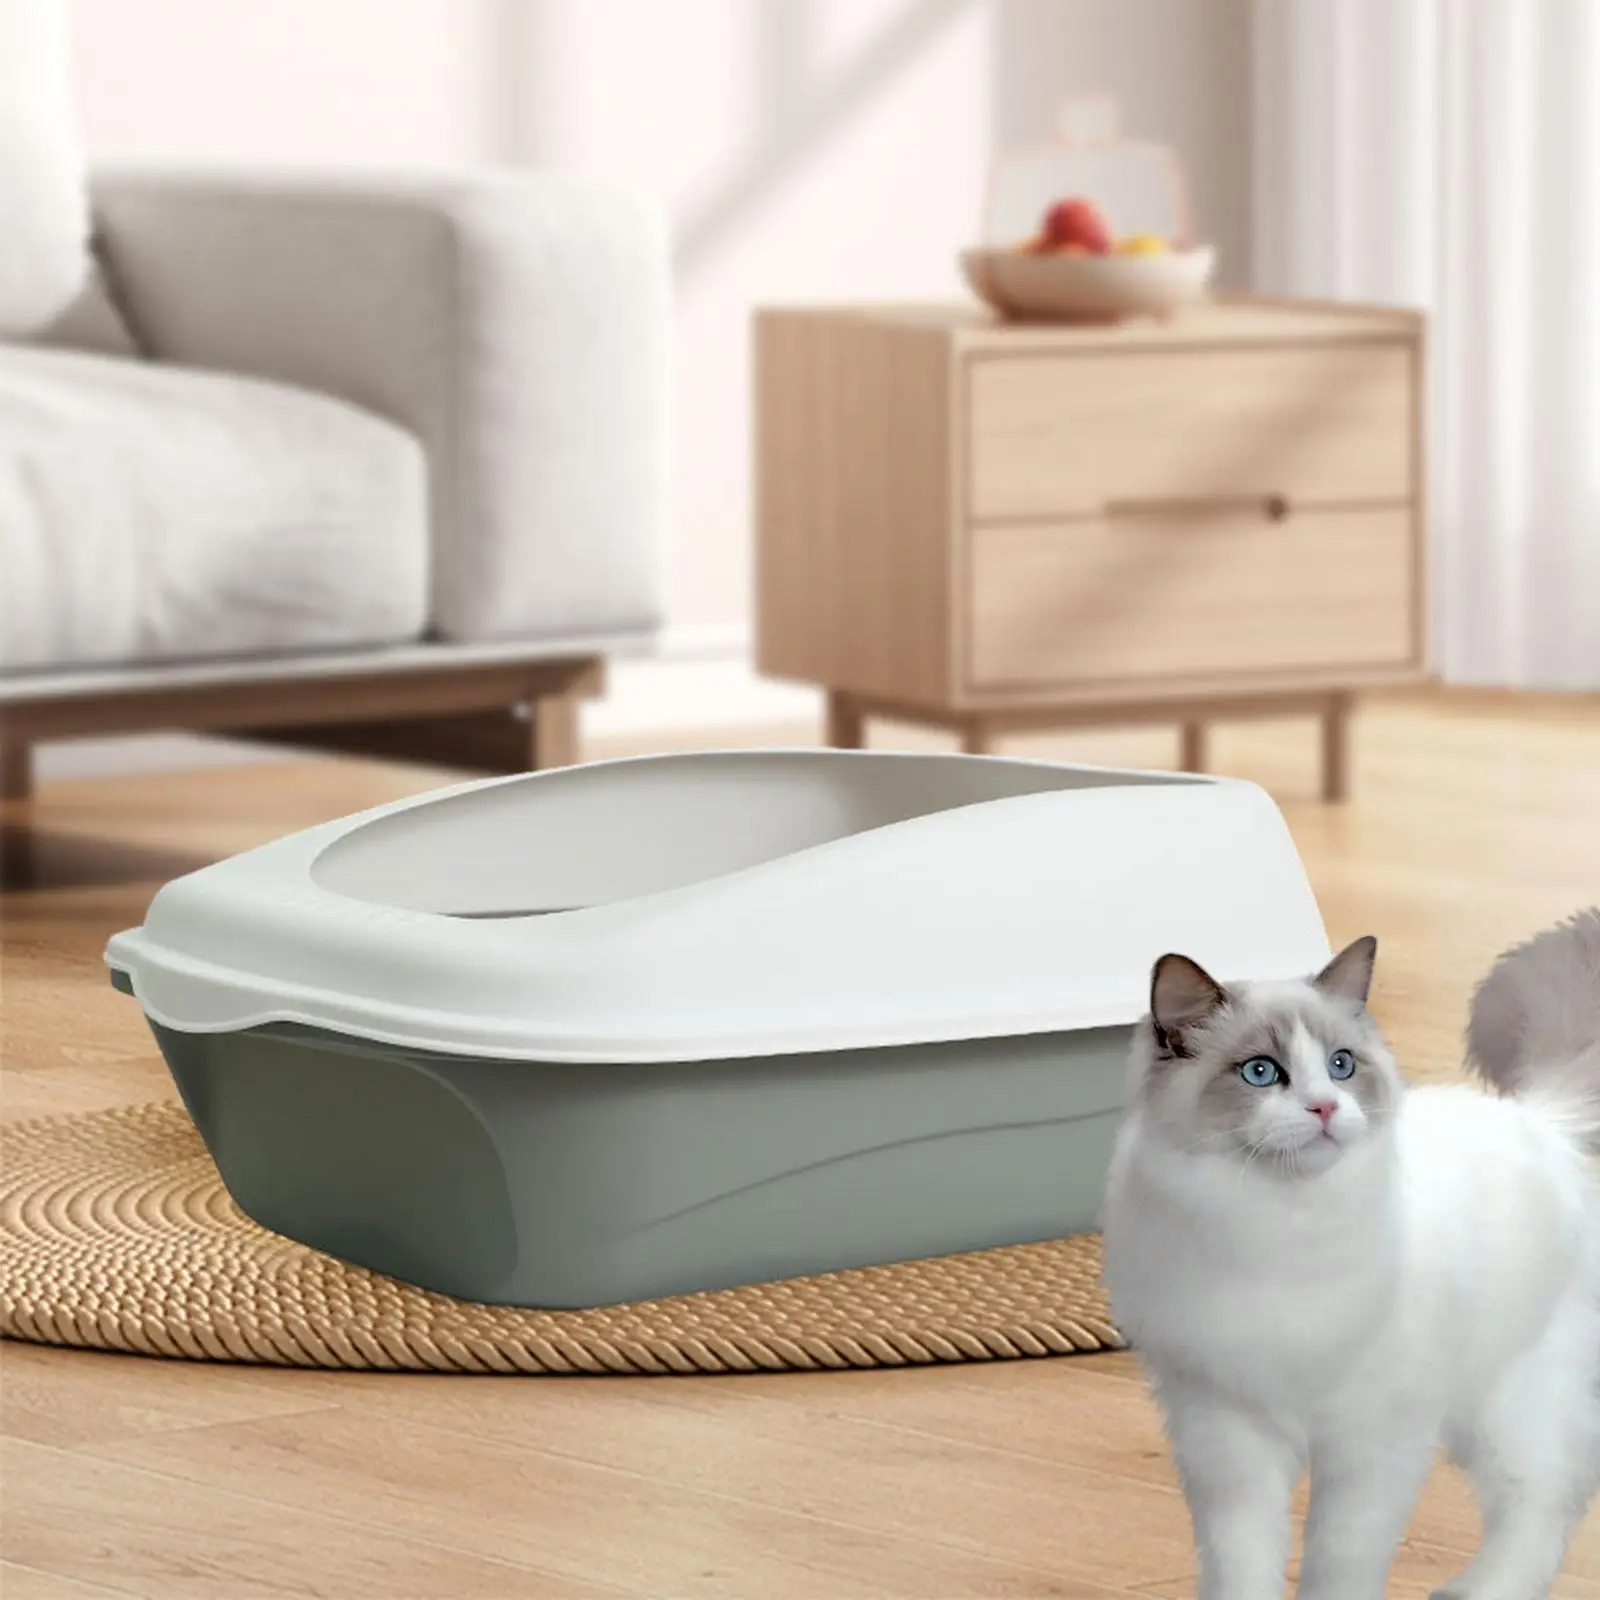 Semi Enclosed Pet Litter Pan Cage Accessories Splashproof Litter Pans for Bunny Kitten Kitty Small and Medium Cats Indoor Cats